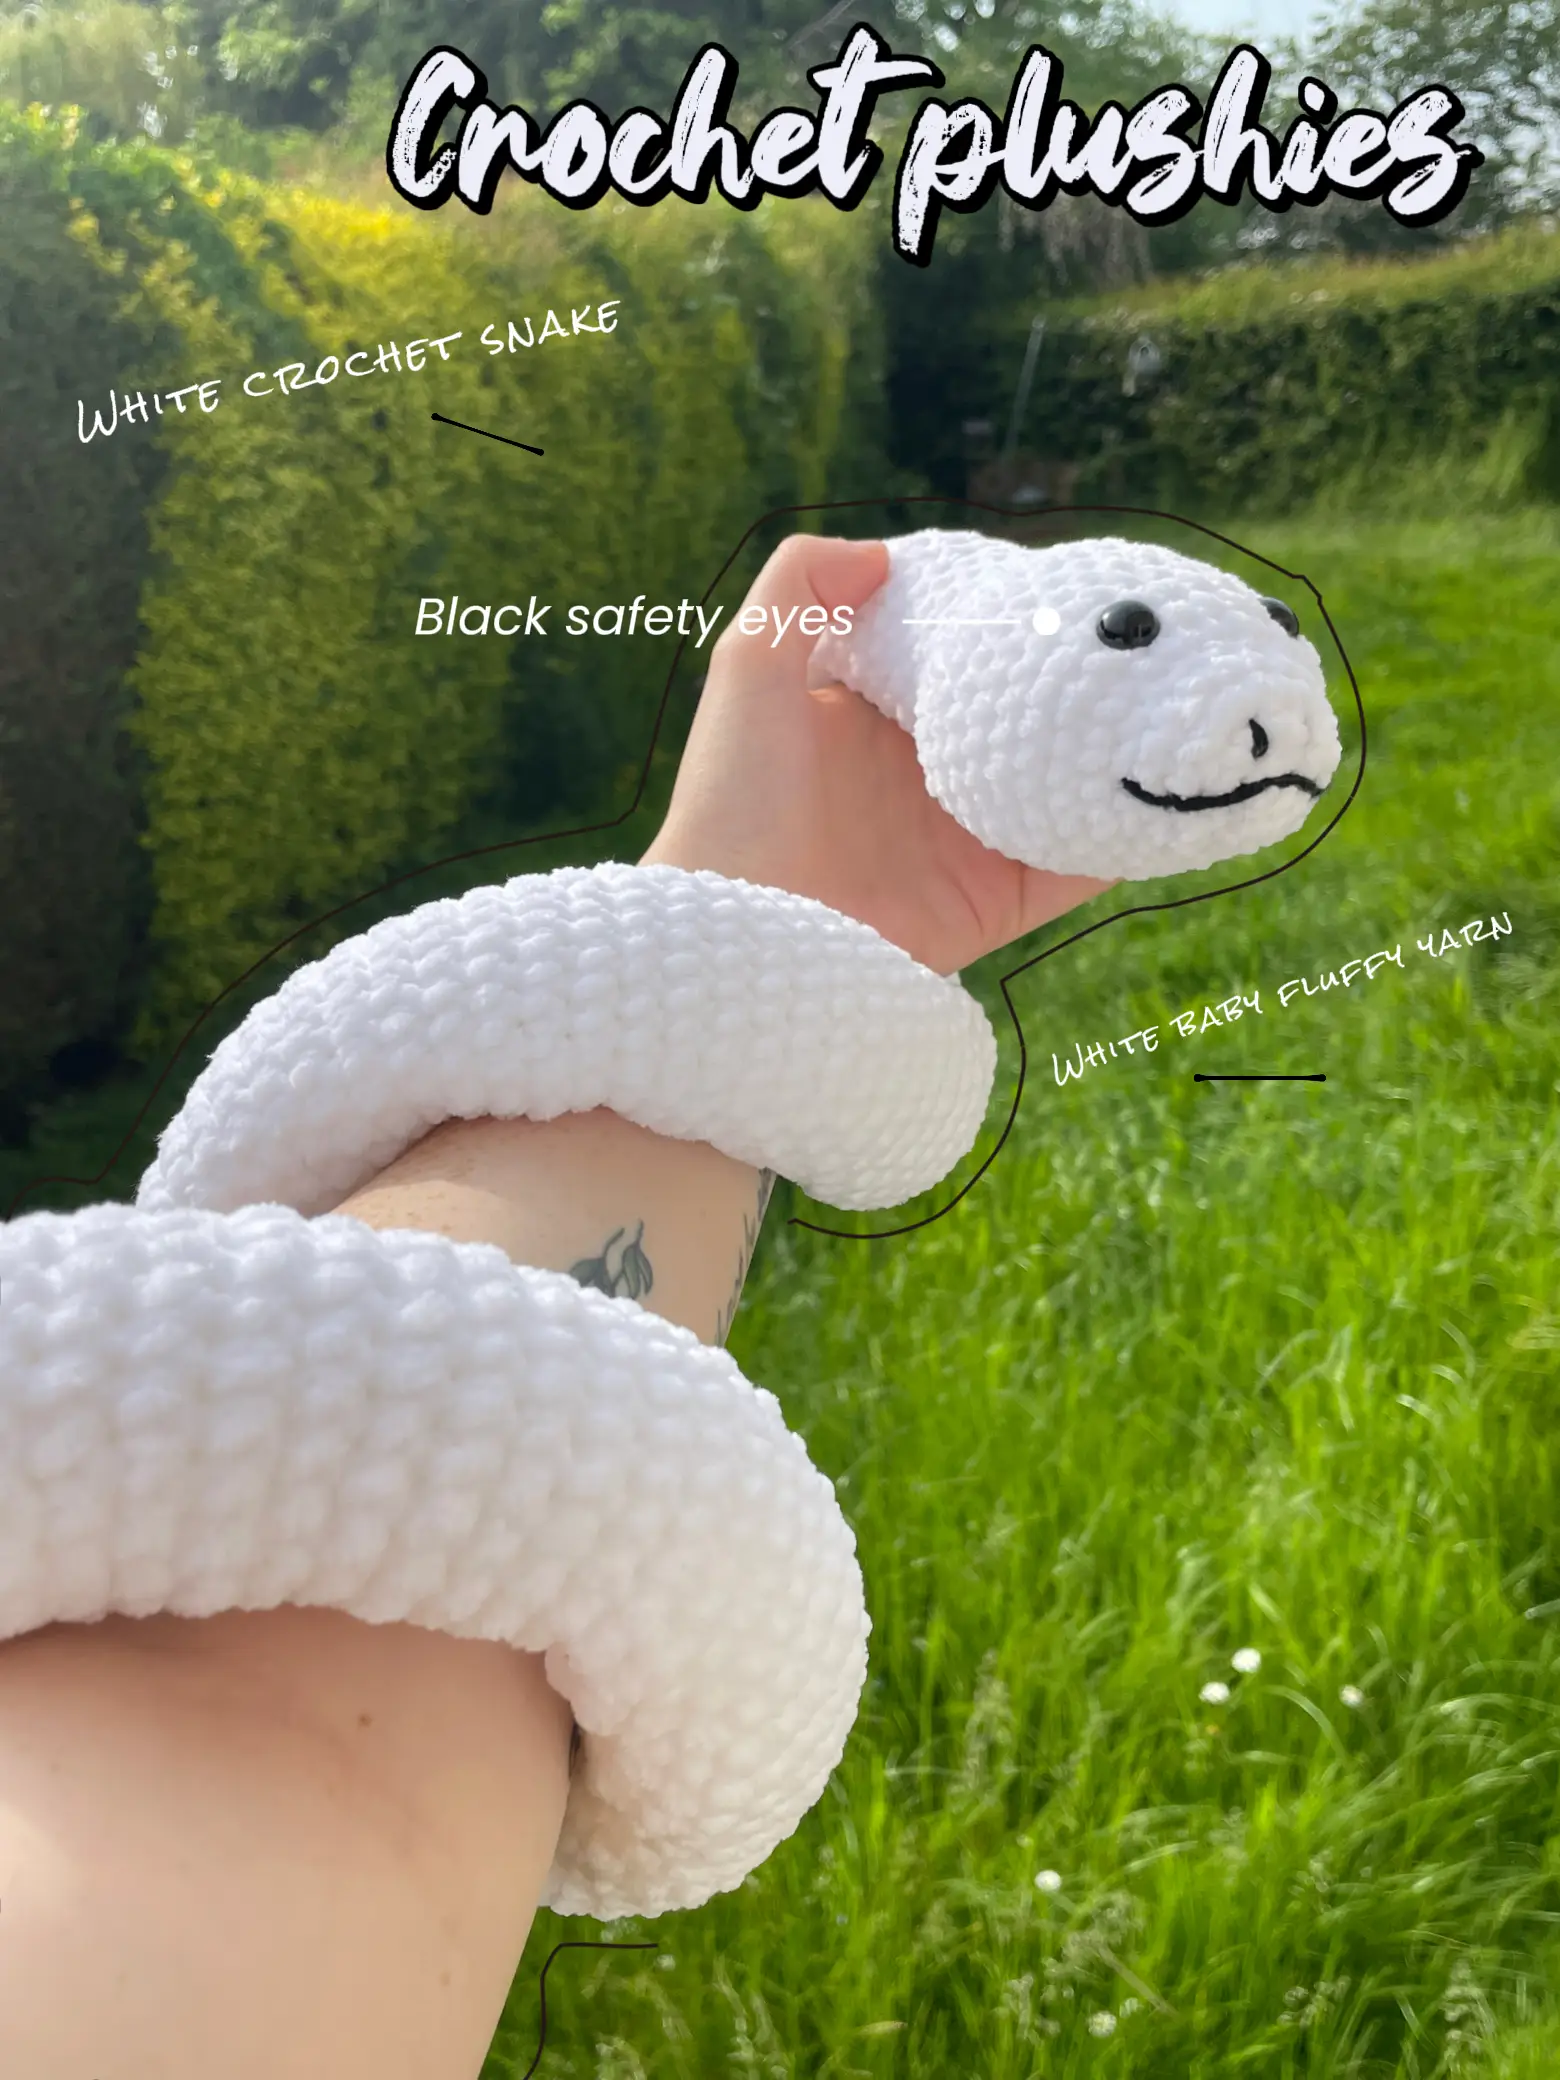 Crochet snakes are so fun to make 🤍✨🌸, Gallery posted by Amalia jayne